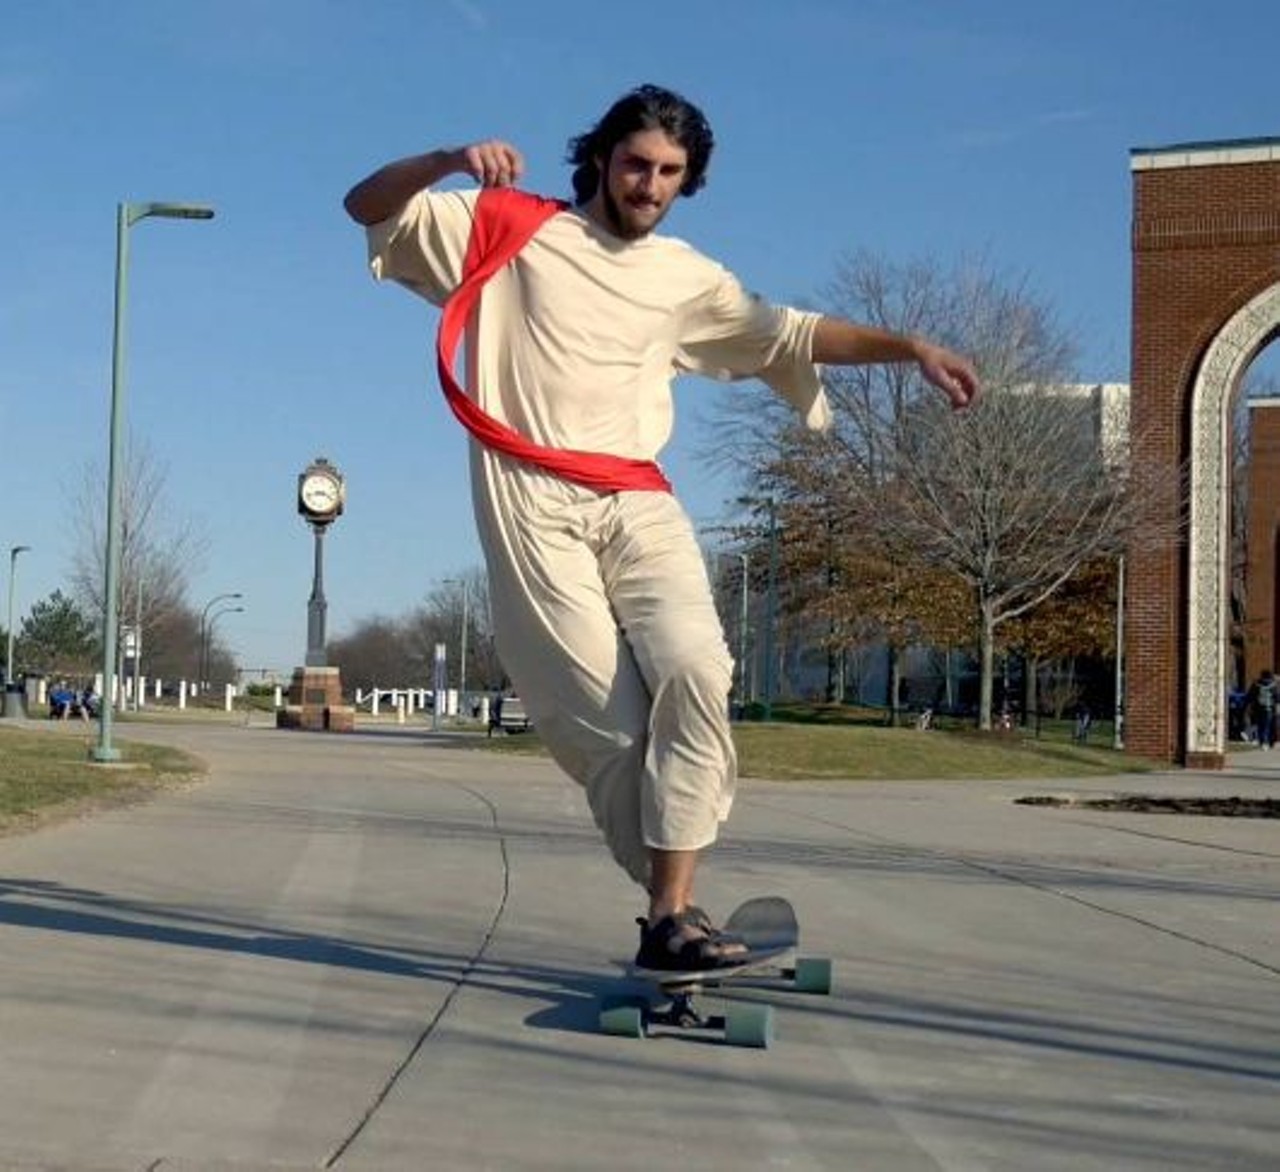  &#147;Why One University of Akron Student Longboards Around Campus Dressed Like Jesus&#148;
Feb. 22
If you&#146;ve ever spotted a Christ-like figure longboarding around the University of Akron, you (probably) weren&#146;t hallucinating. Chances are it was Joe Gerin, or &#147;Longboard Jesus,&#148; who put his skateboarding skills and distinctive facial hair to good use earlier this year.
Photo via jmgerin /Instagram